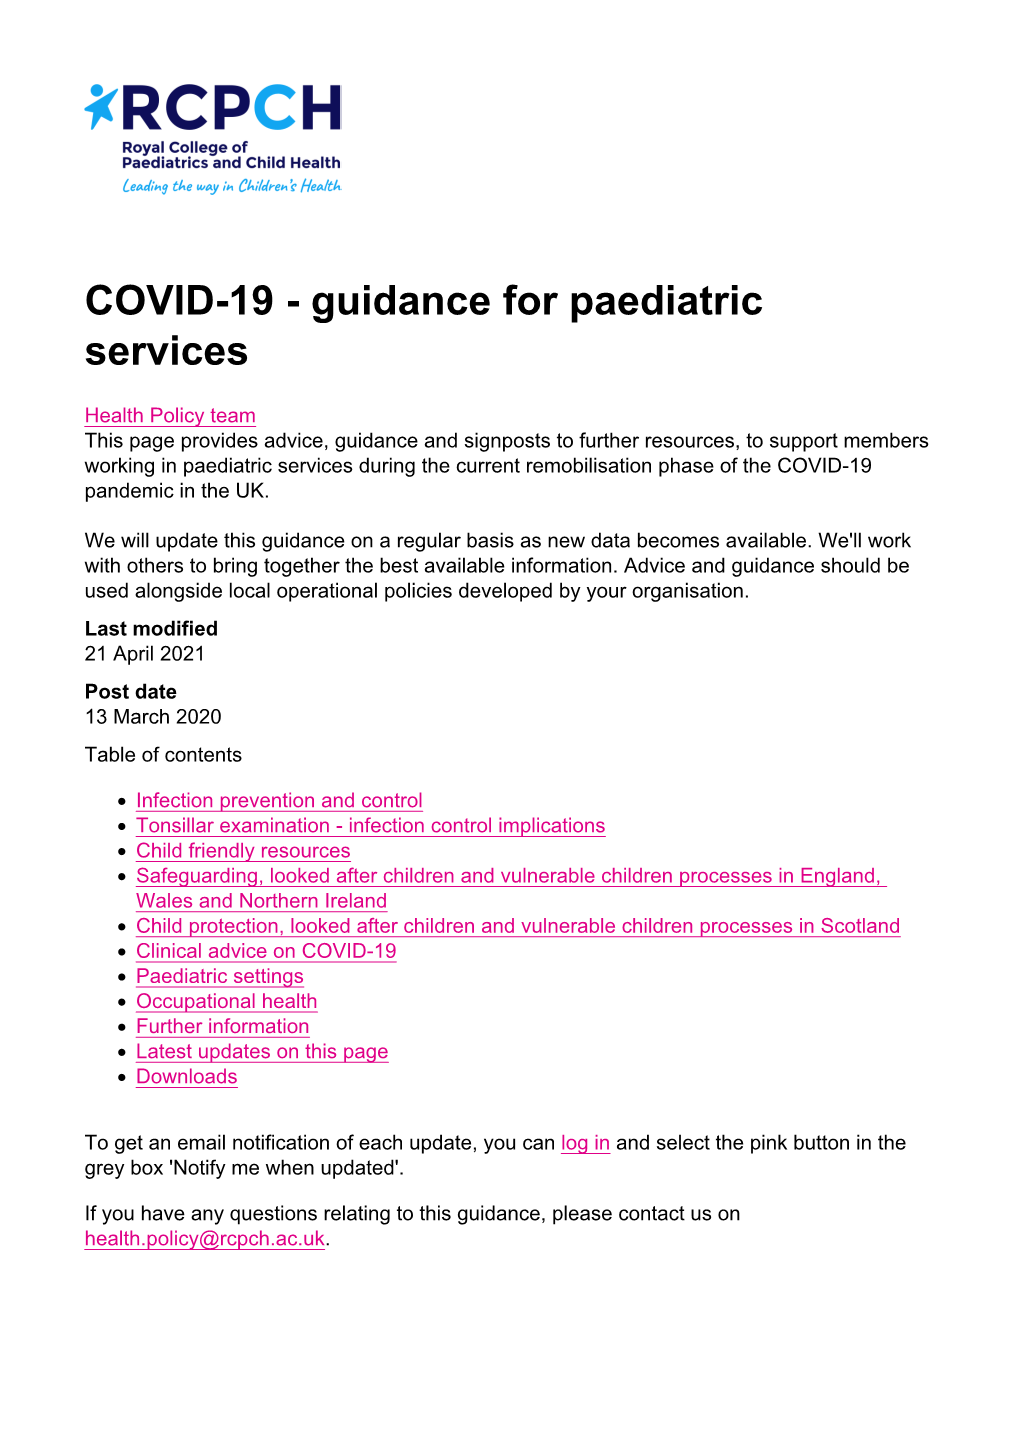 COVID-19 - Guidance for Paediatric Services